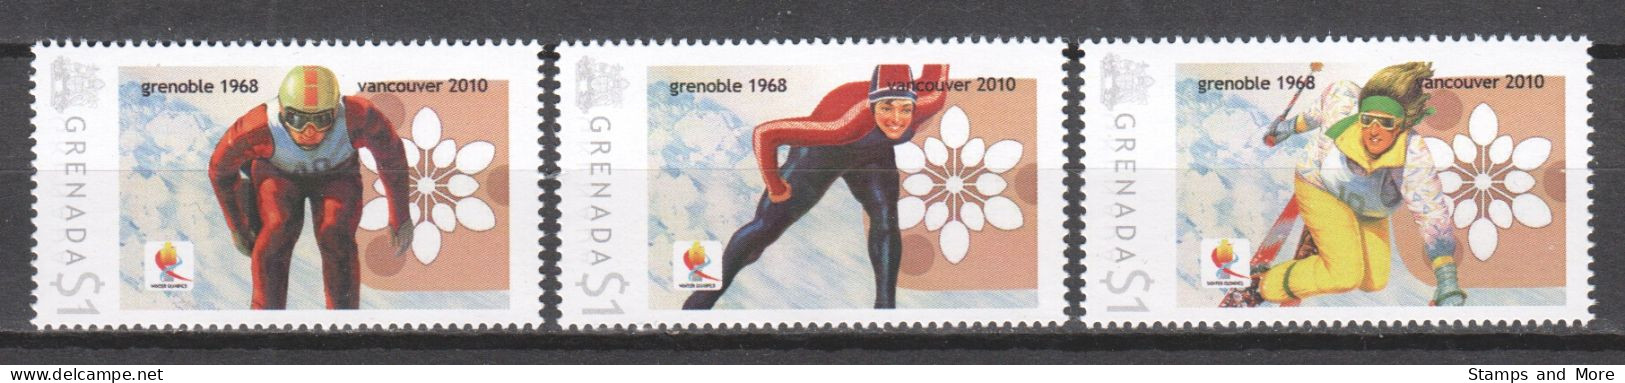 Grenada - Limited Edition Serie 10 MNH - WINTER OLYMPICS VANCOUVER 2010 - GRENOBLE 1968 - Winter 2010: Vancouver